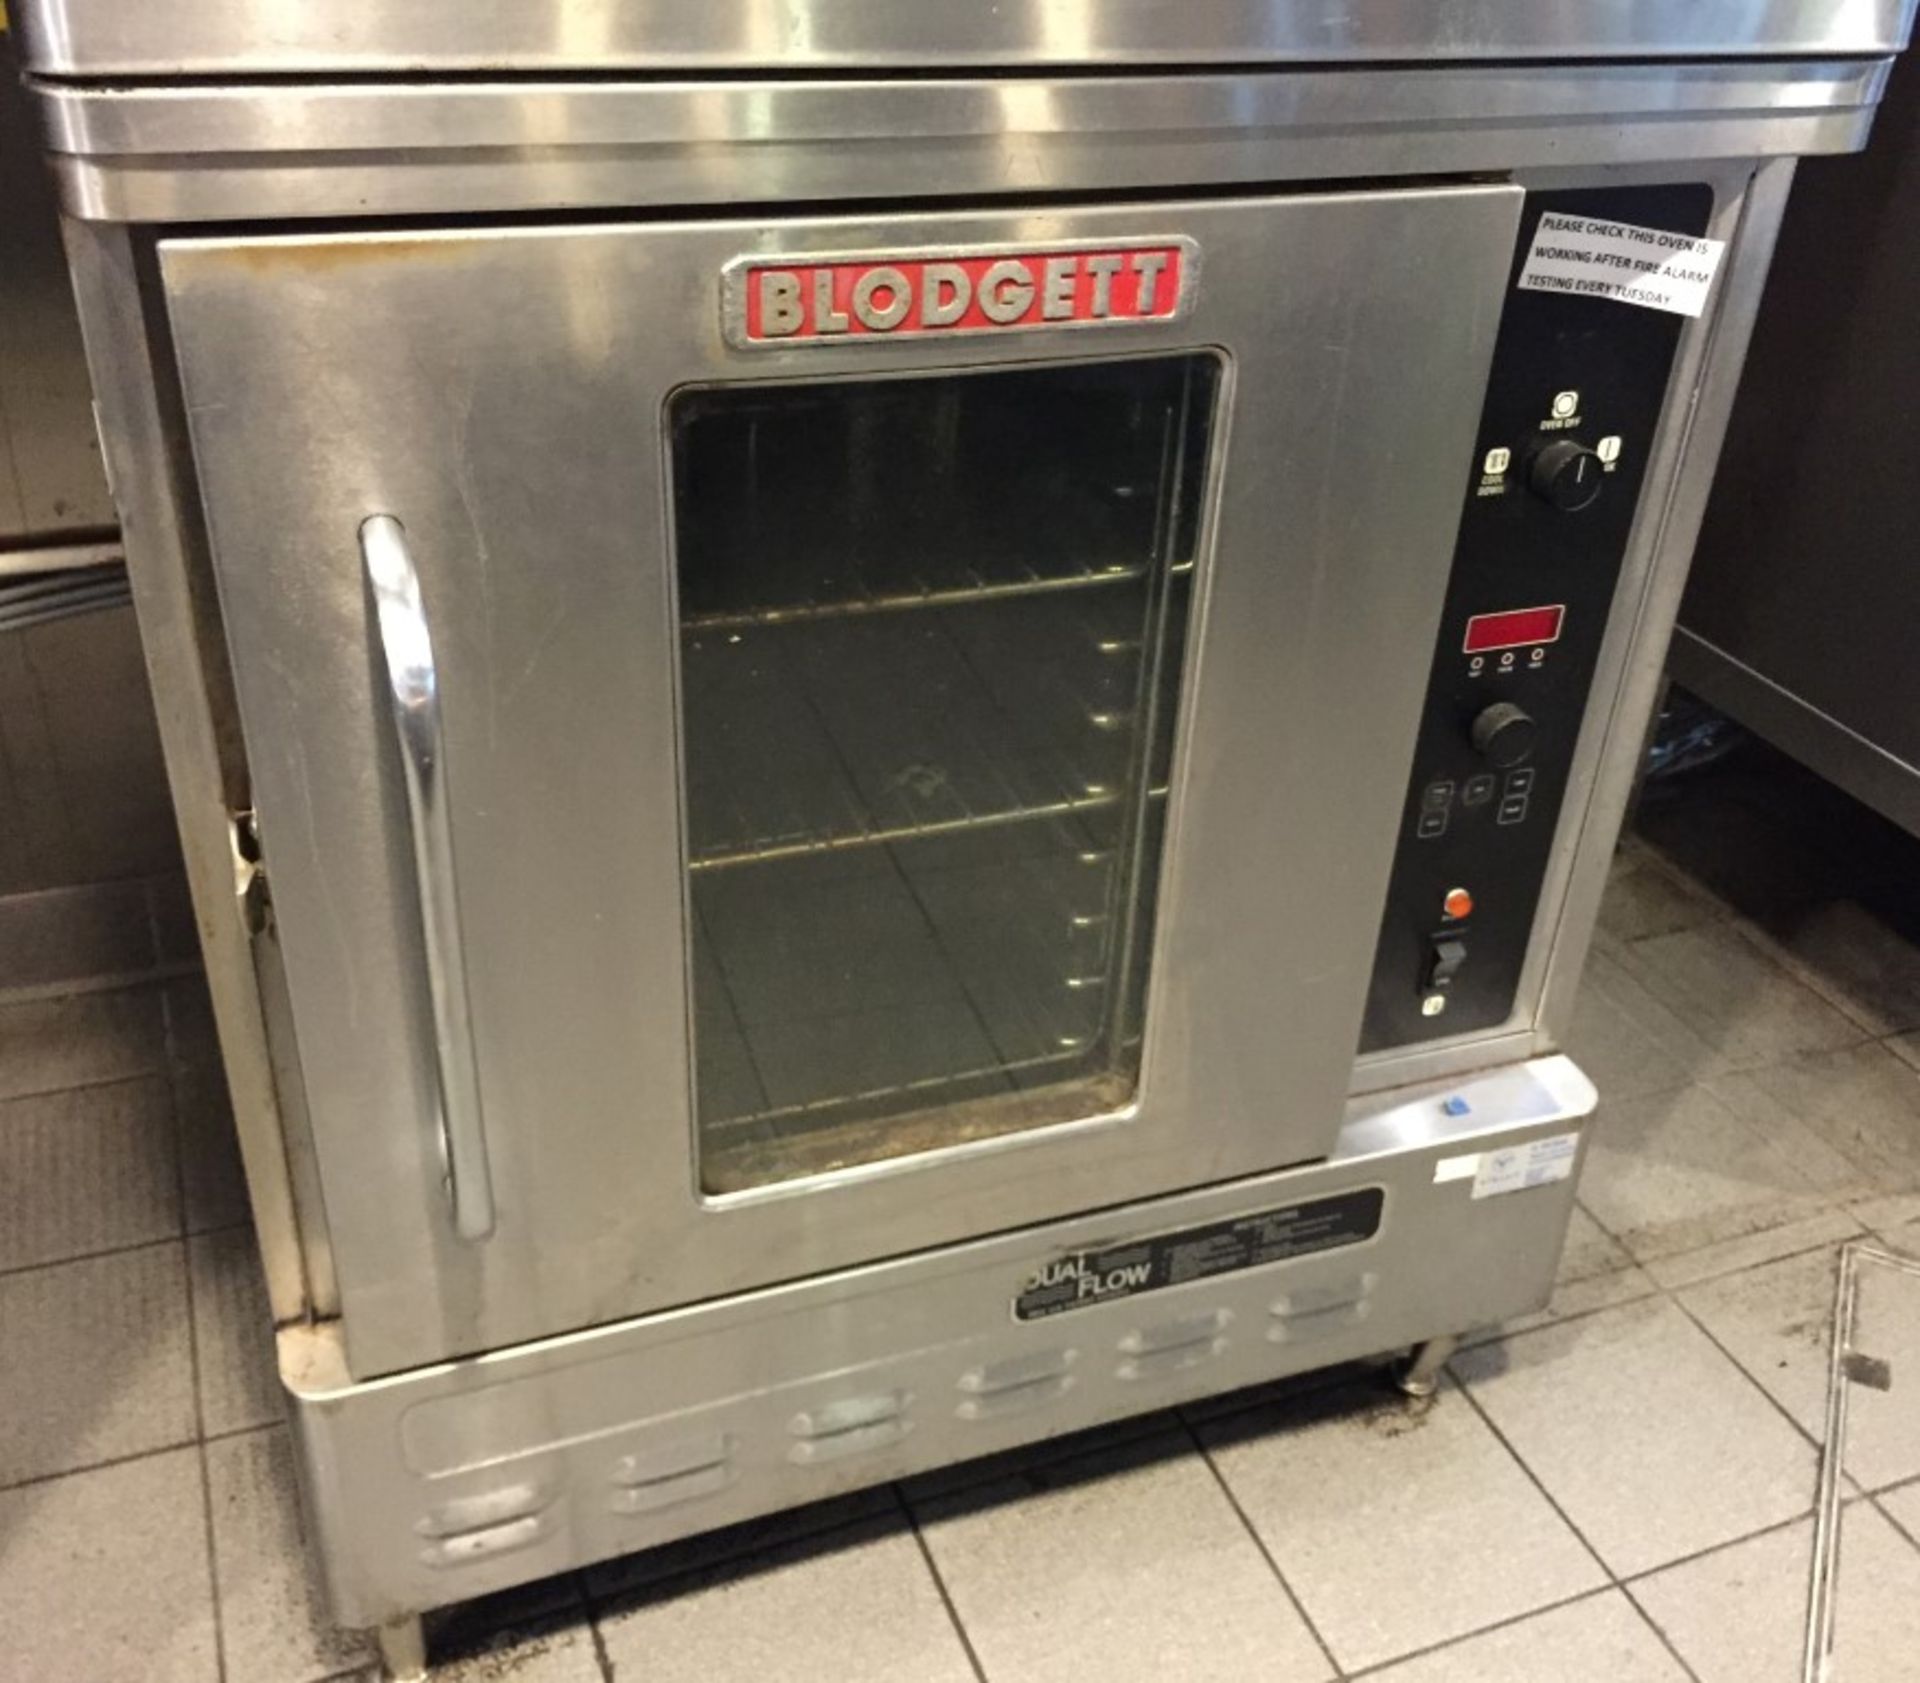 1 x Blodgett Convection Oven - Model DFG50 - Features Duel Flow, Half Size, Single Deck, Solid State